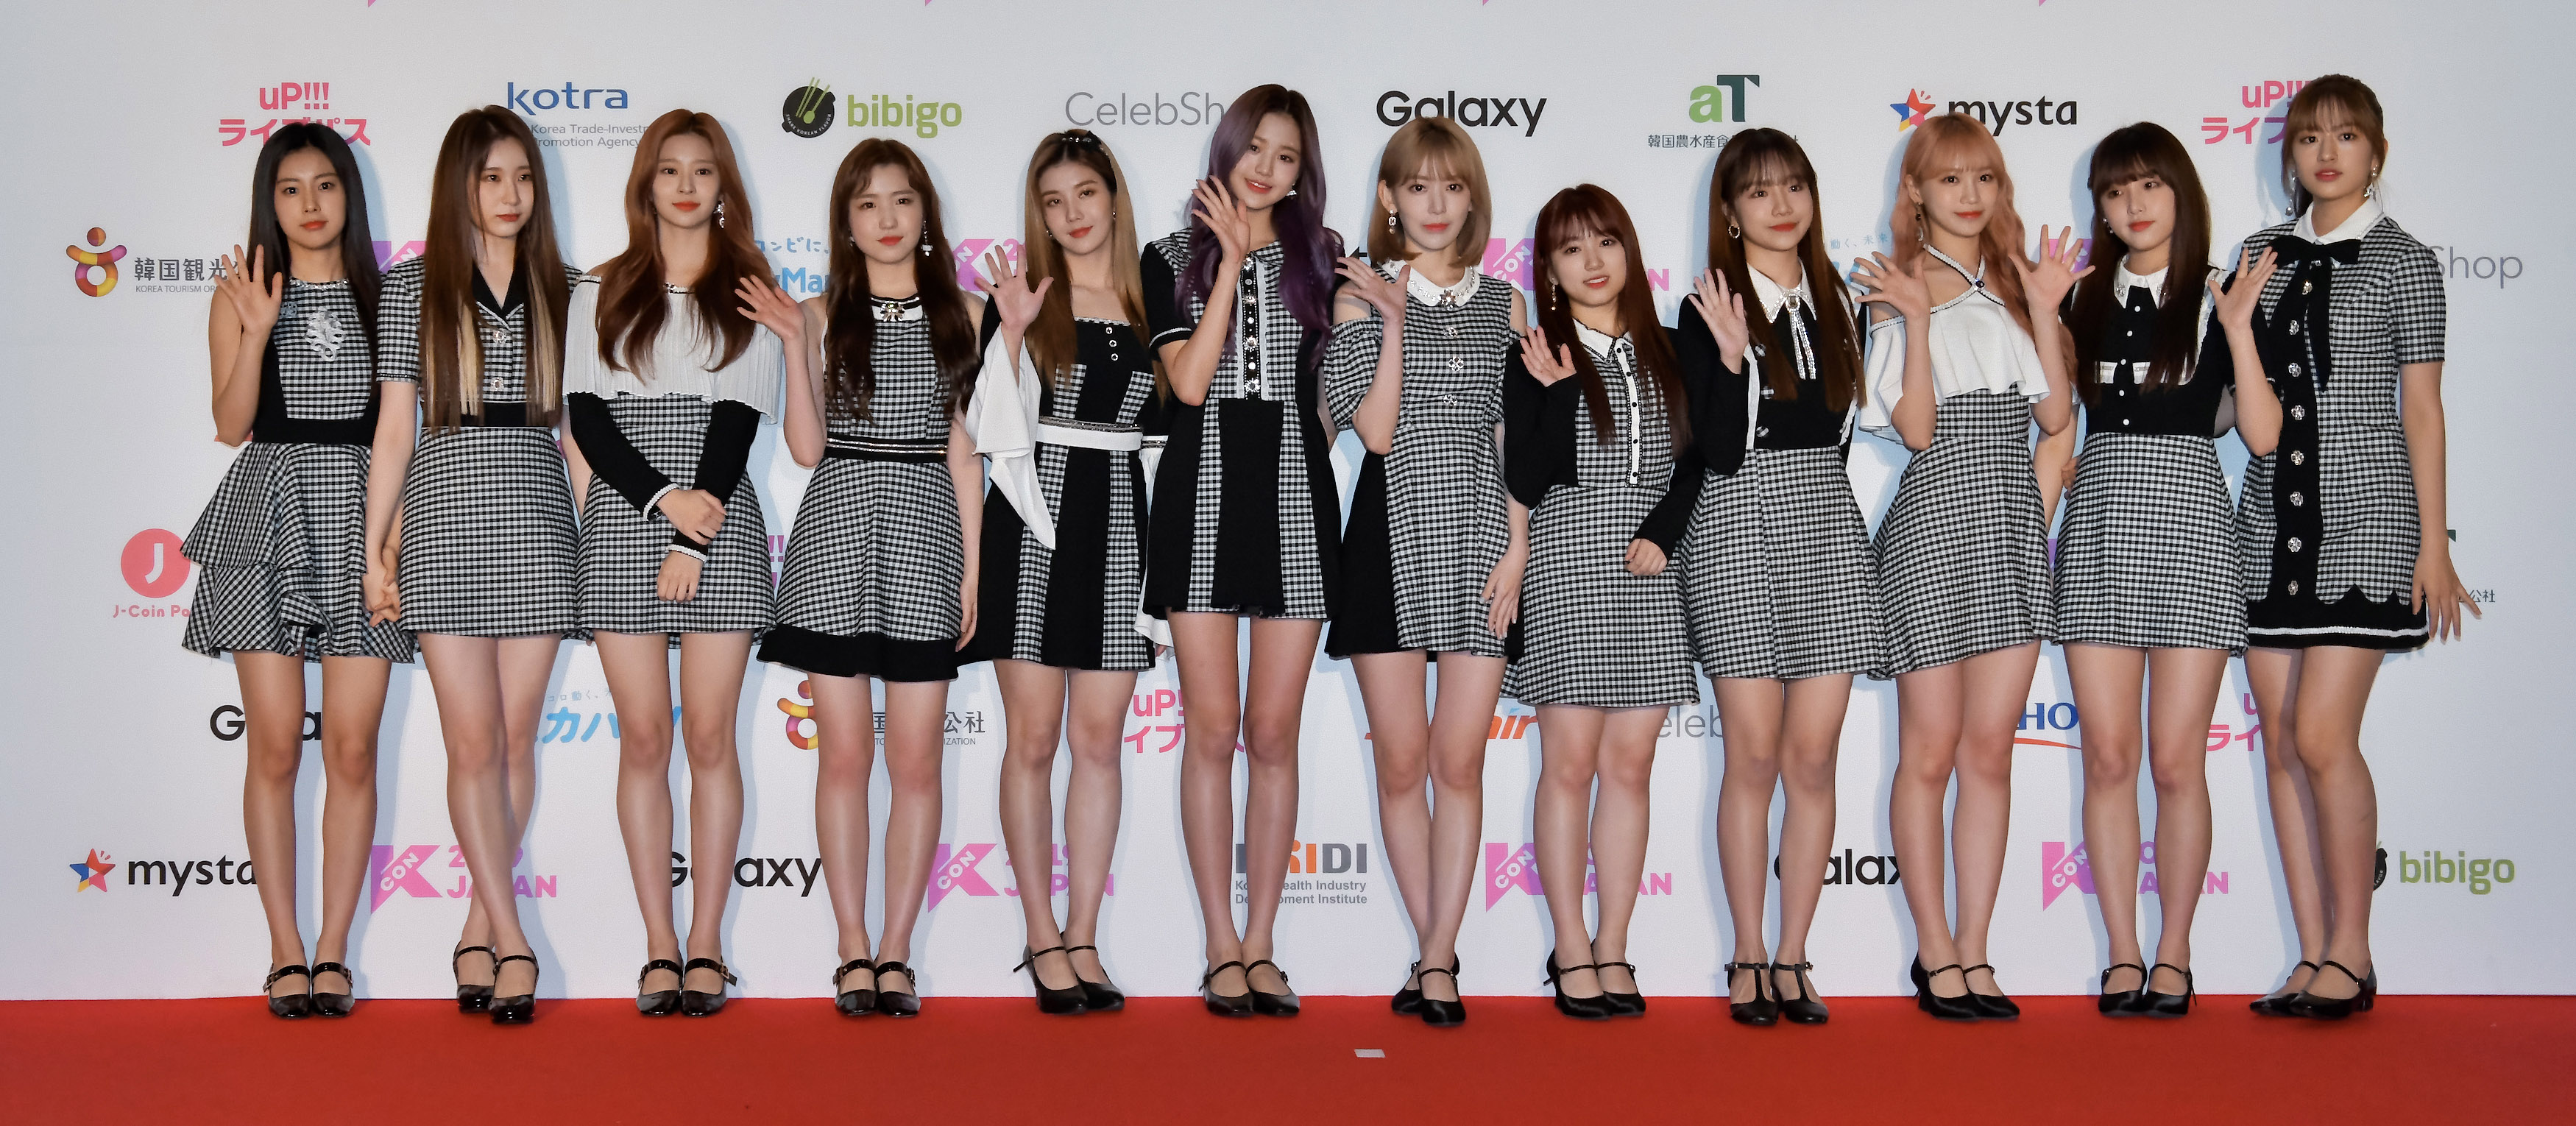 Where Are IZ*ONE Members Now? KPop Groups, Solo Careers J14